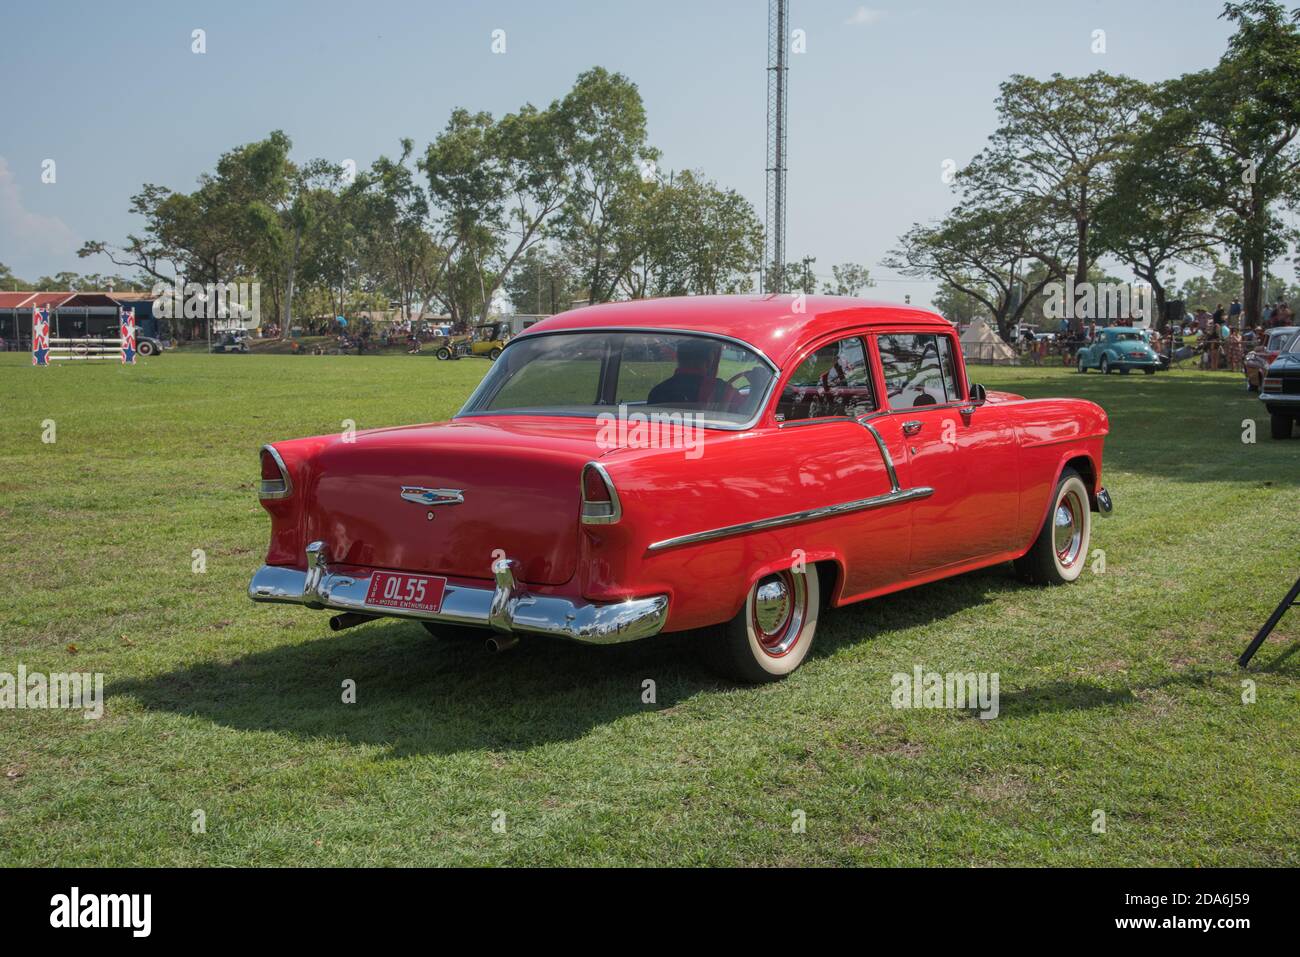 Darwin, NT, Australia-July 27,2018: Vintage red Chevy Bel-air at parade at the Darwin Show in the NT of Australia Stock Photo